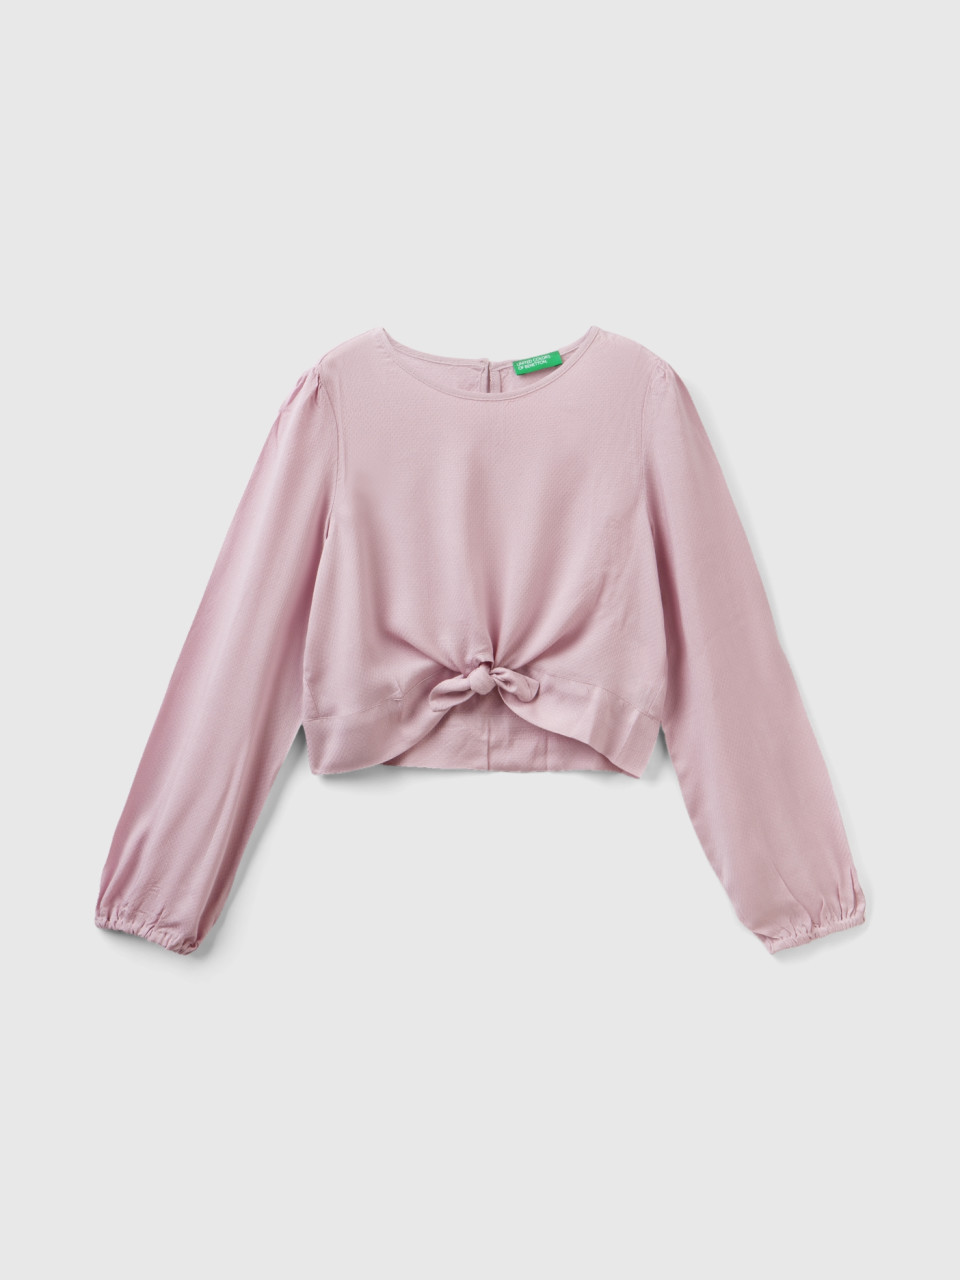 Benetton, Cropped Blouse With Knot, Pink, Kids